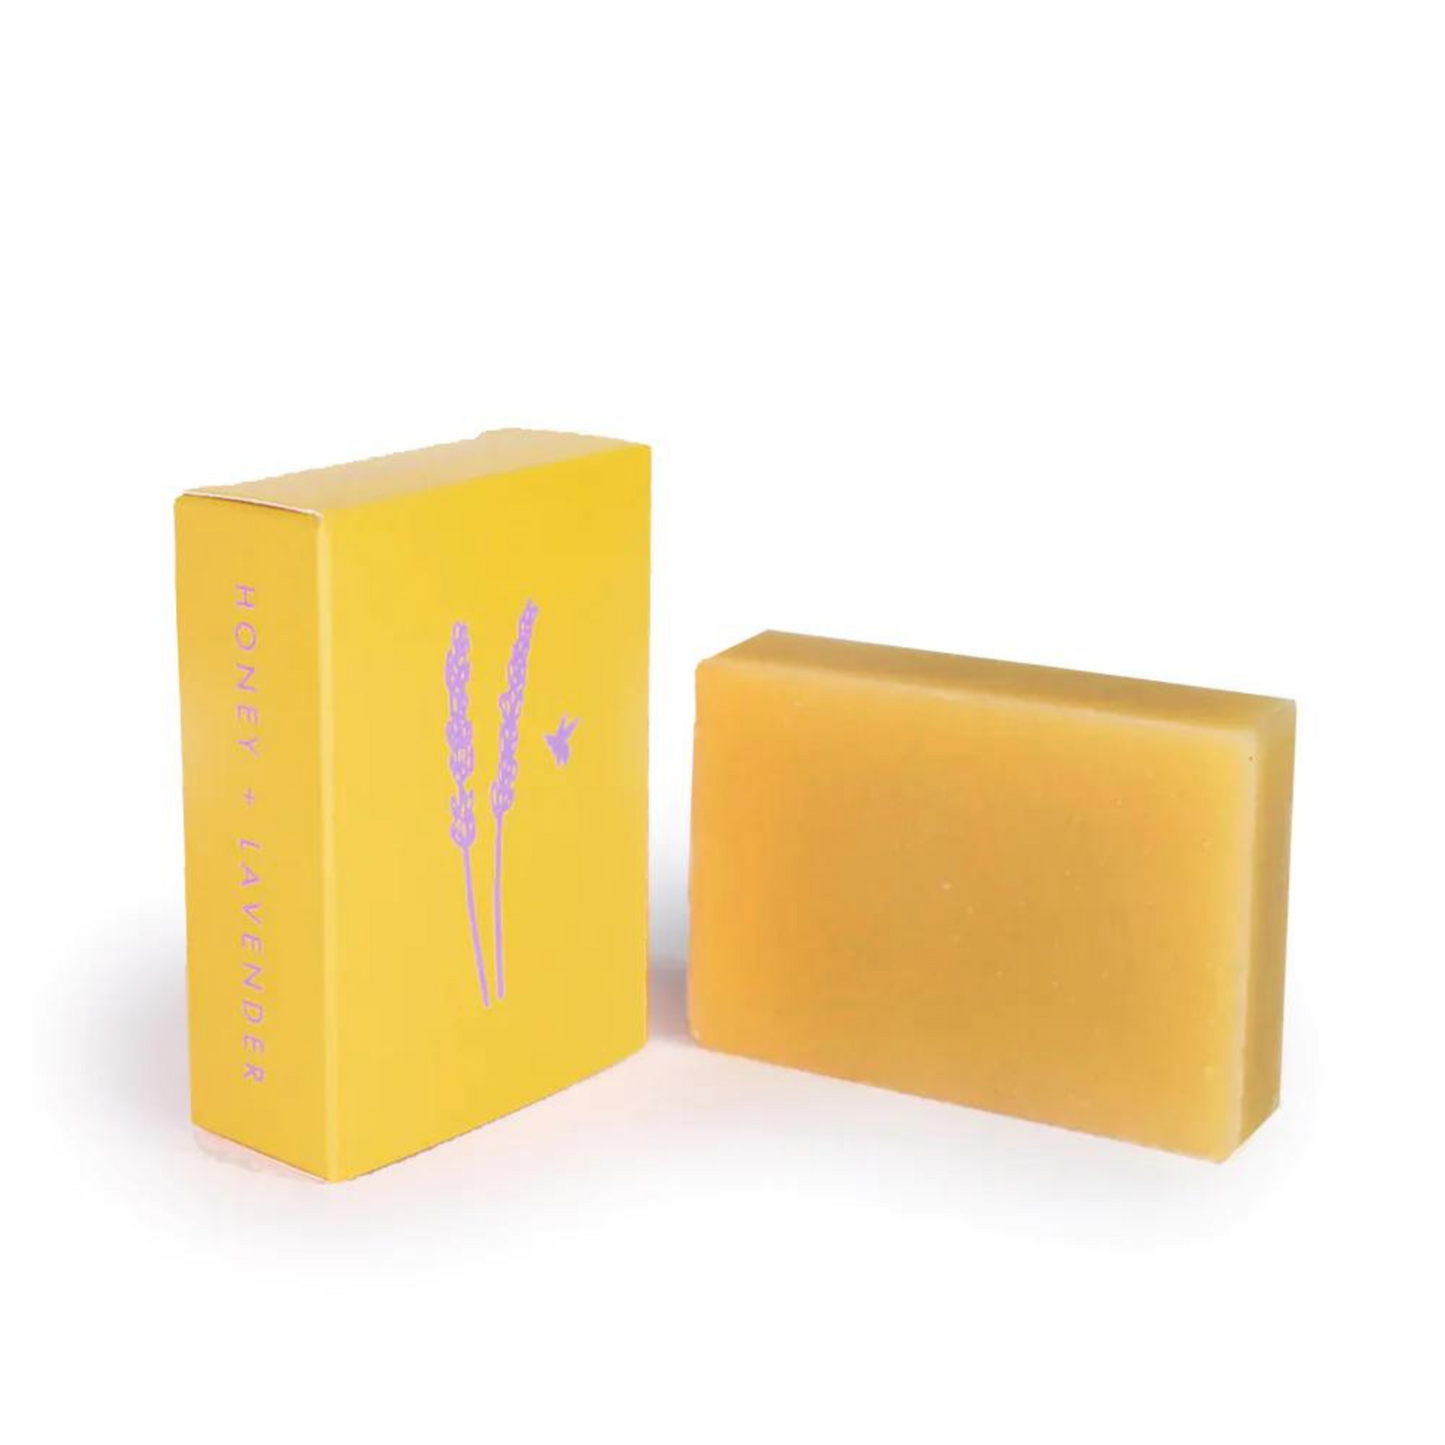 Primary Image of ALTR Lavender and Honey Soap Bar